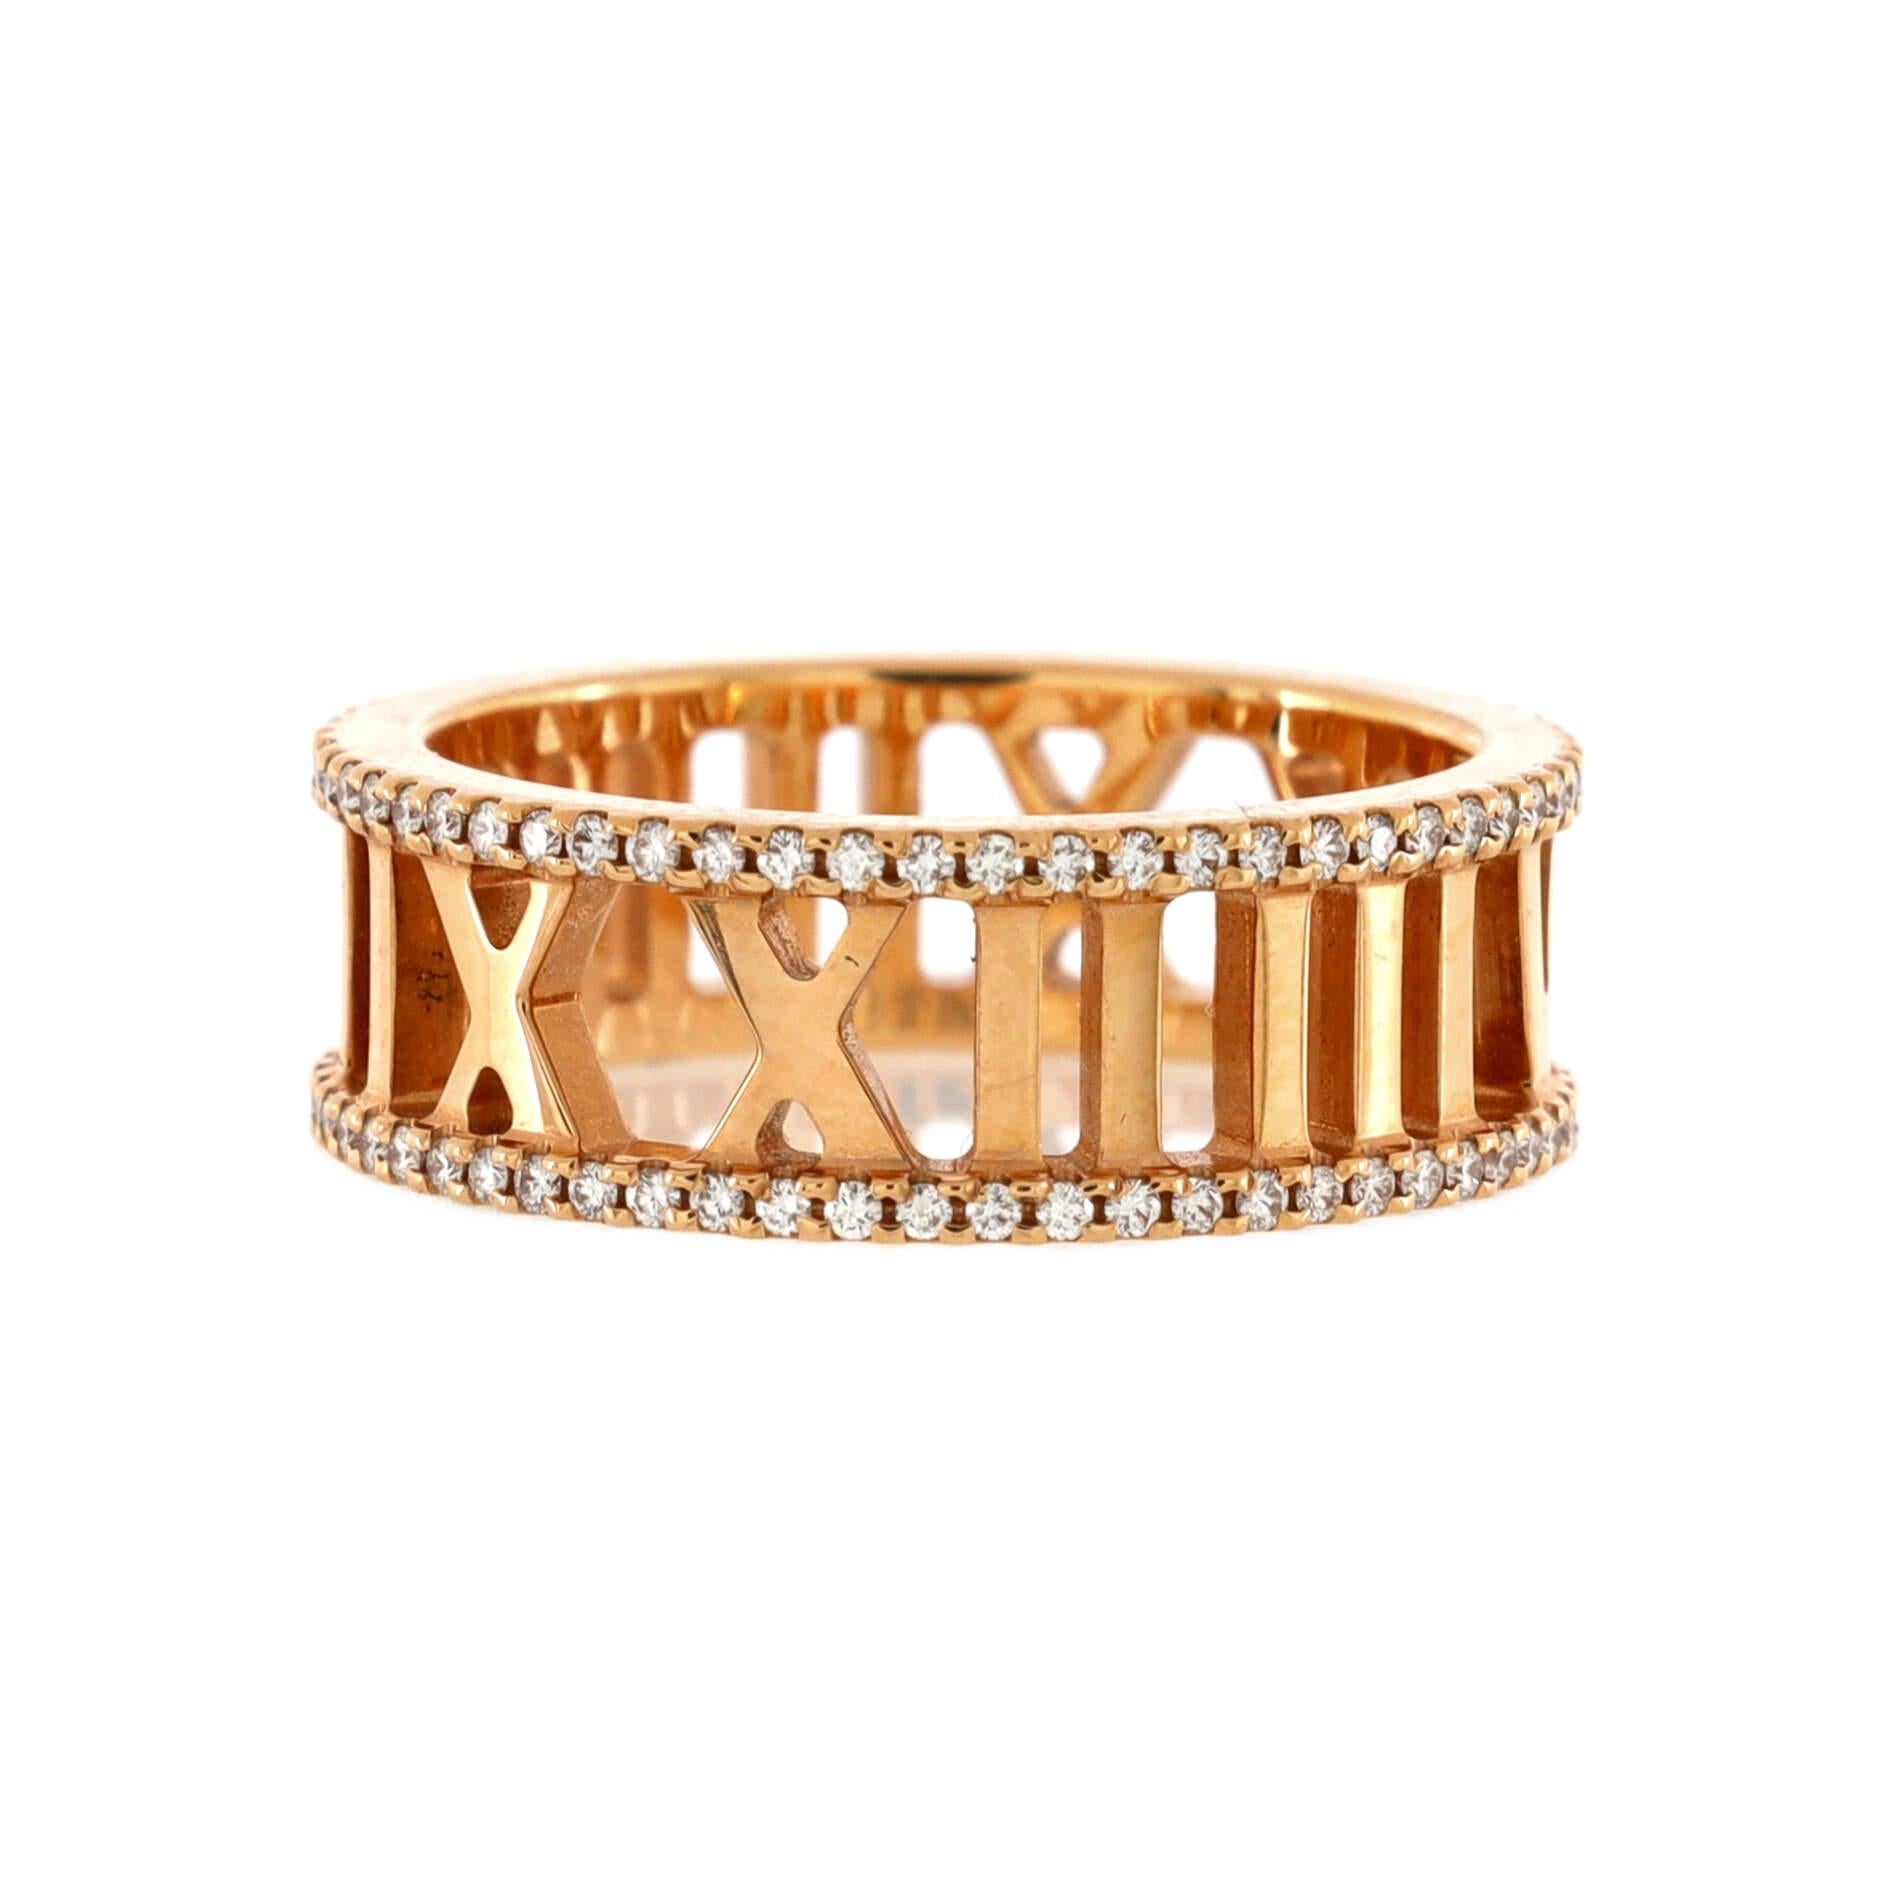 Condition: Great. Minor wear throughout.
Accessories: No Accessories
Measurements: Size: 6.5, Width: 6.75 mm
Designer: Tiffany & Co.
Model: Atlas Open Ring 18K Rose Gold with Diamond 7mm
Exterior Color: Rose Gold
Item Number: 192828/13